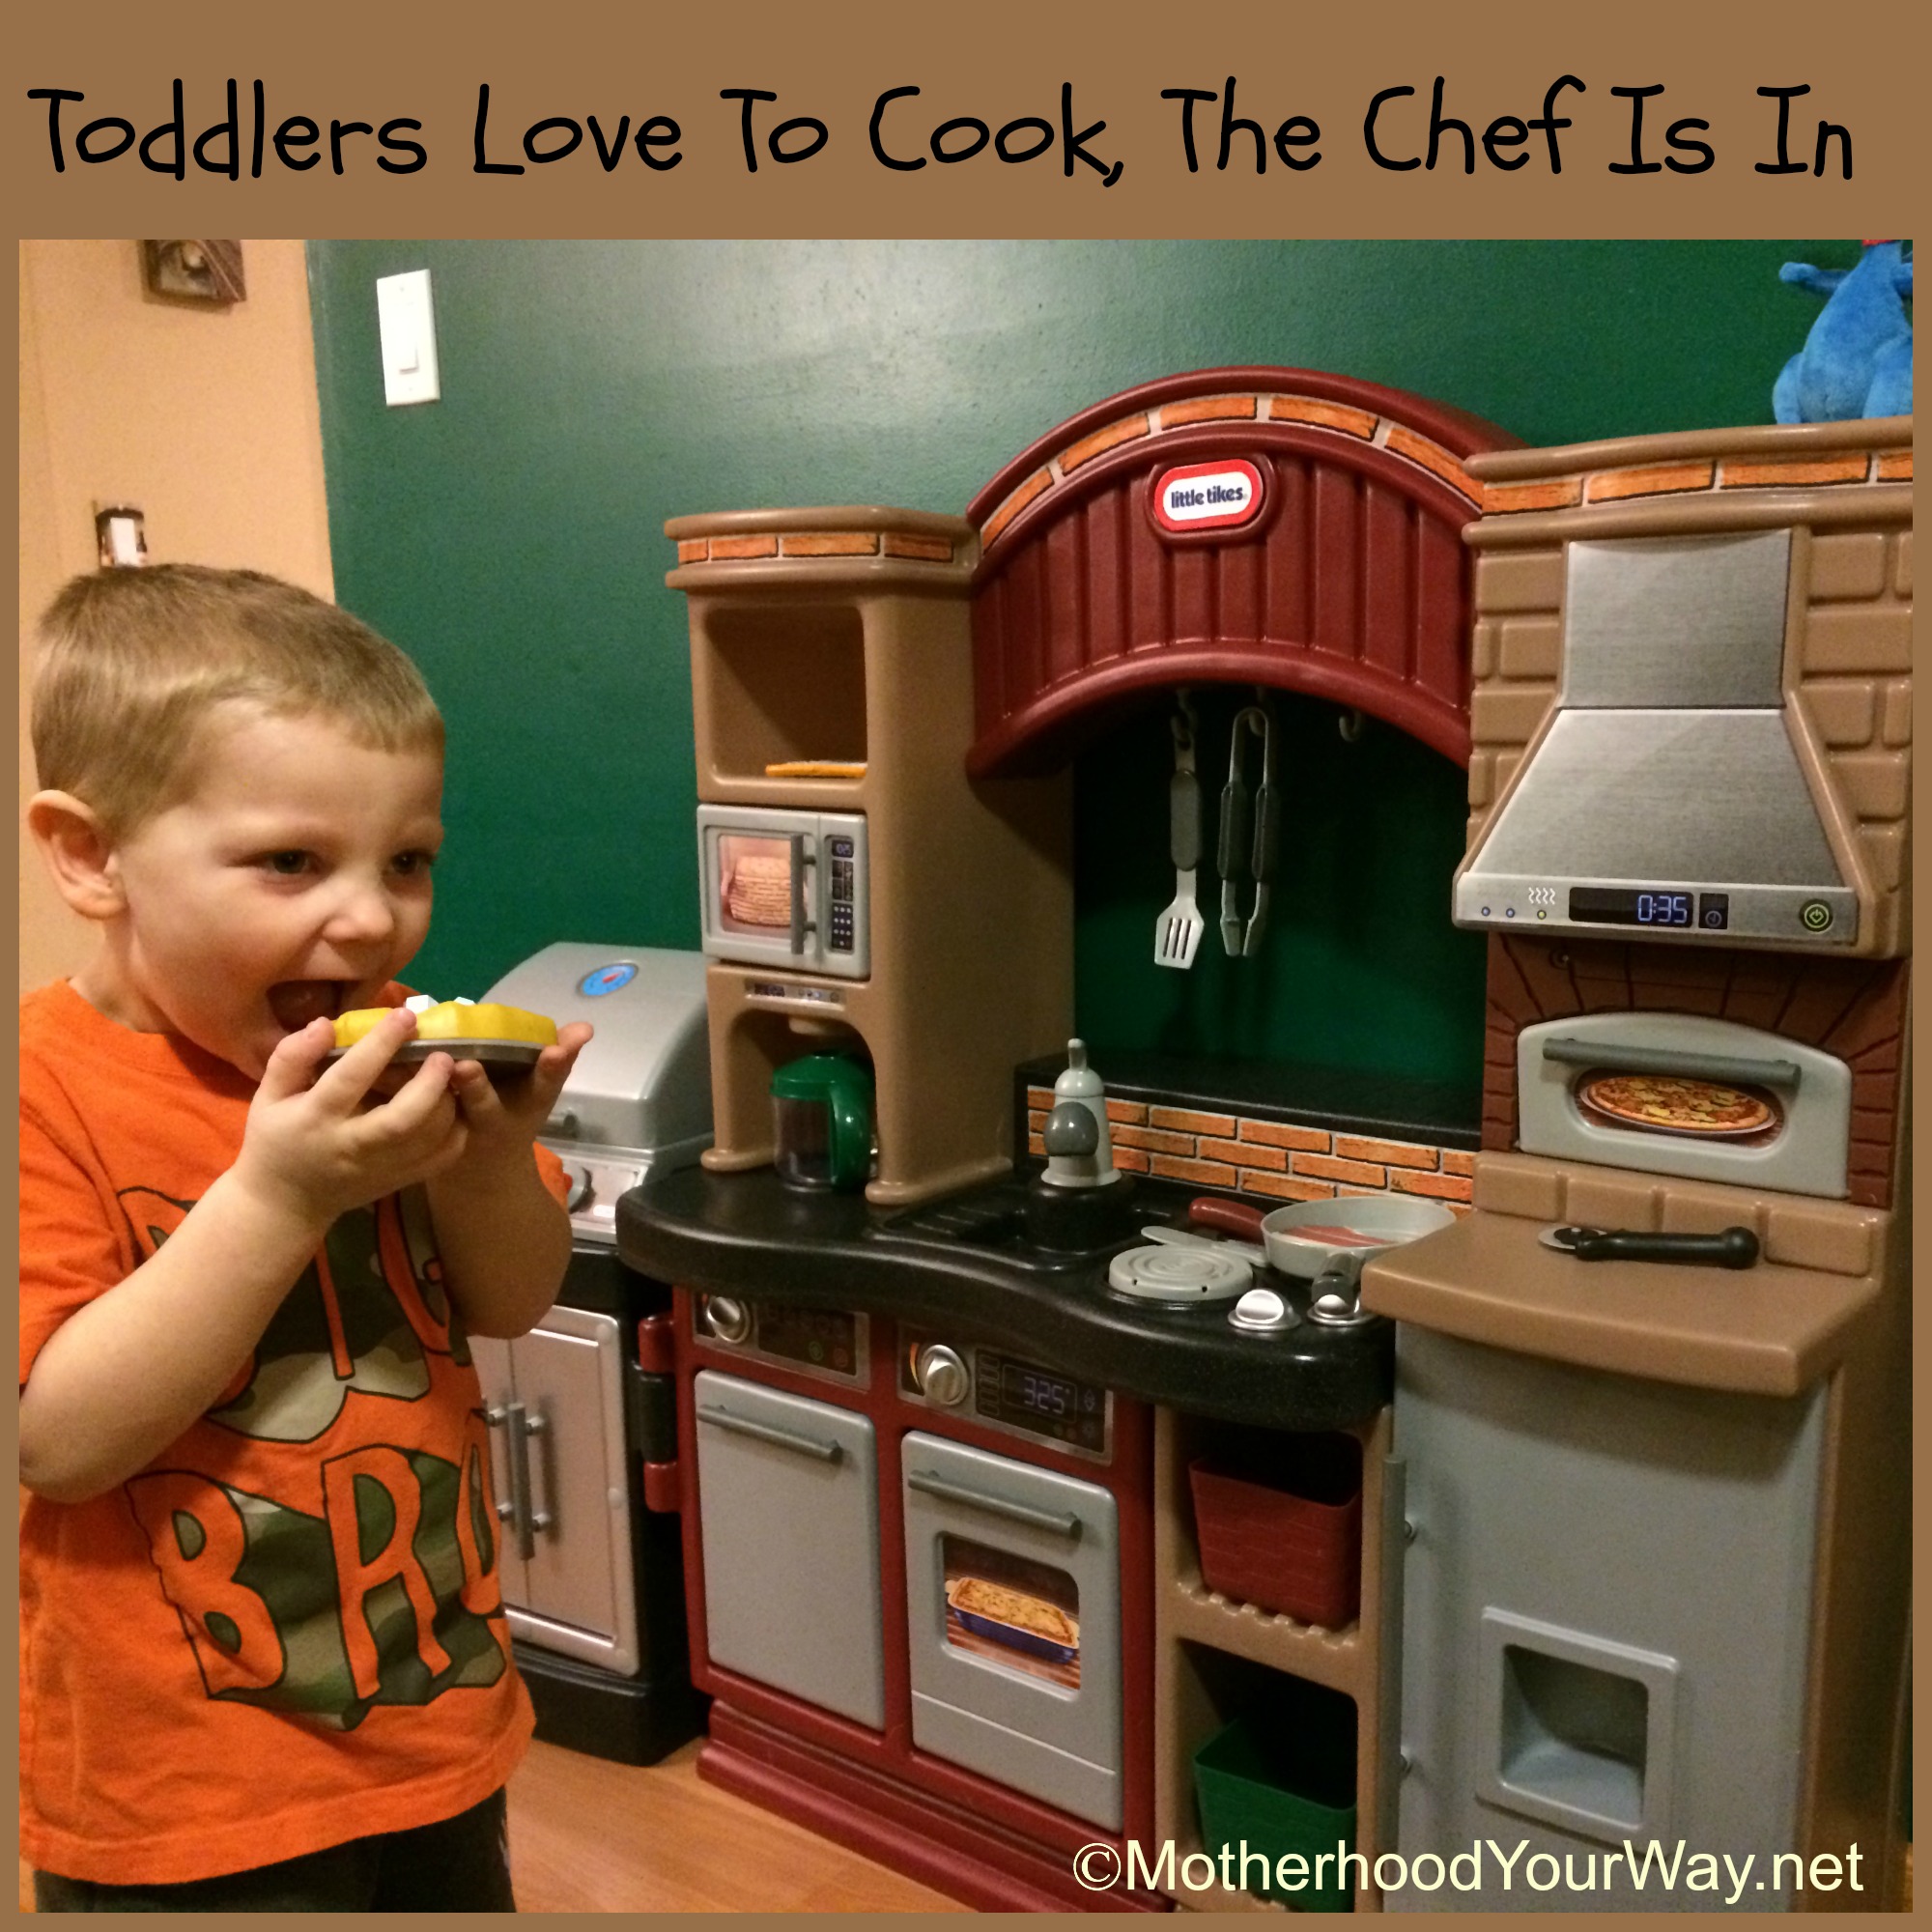 Toddlers Love To Cook, The Chef Is In